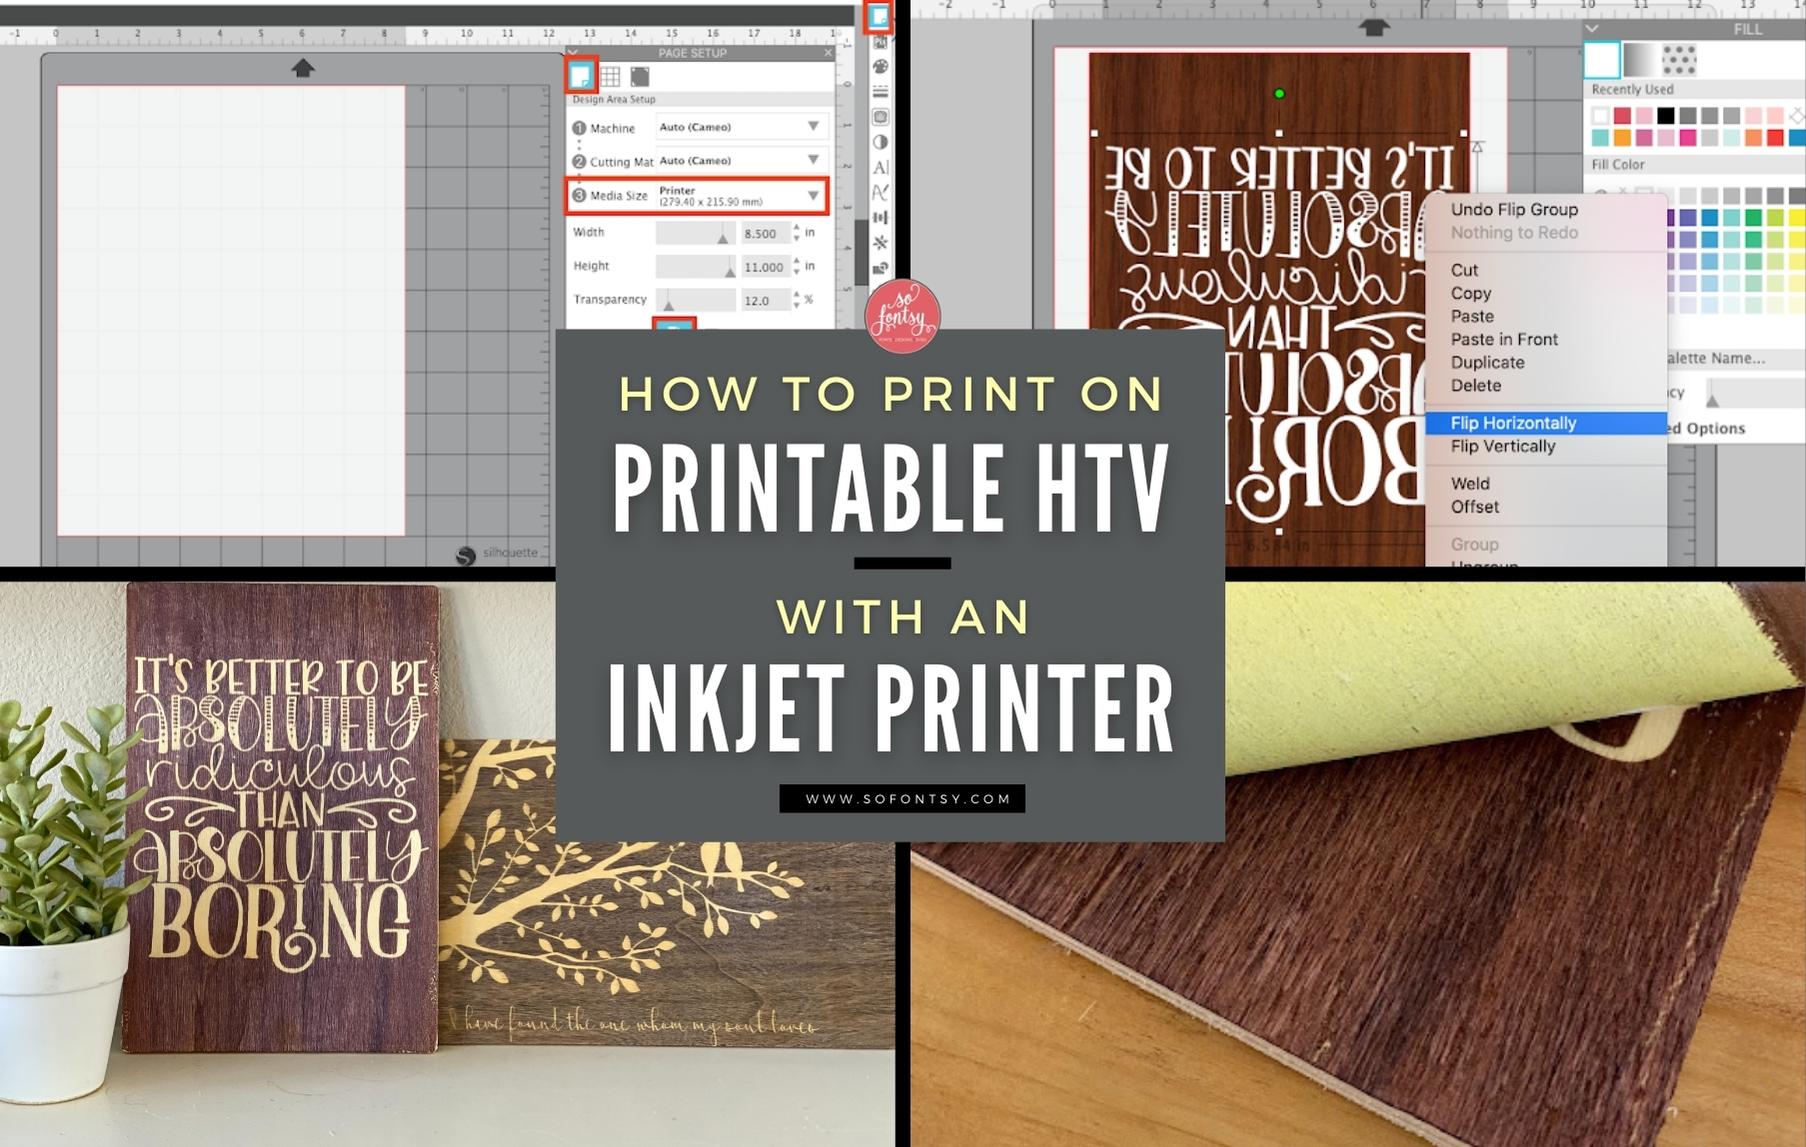 Printable iron makes this so easy. Easy weeding, works with an ink jet